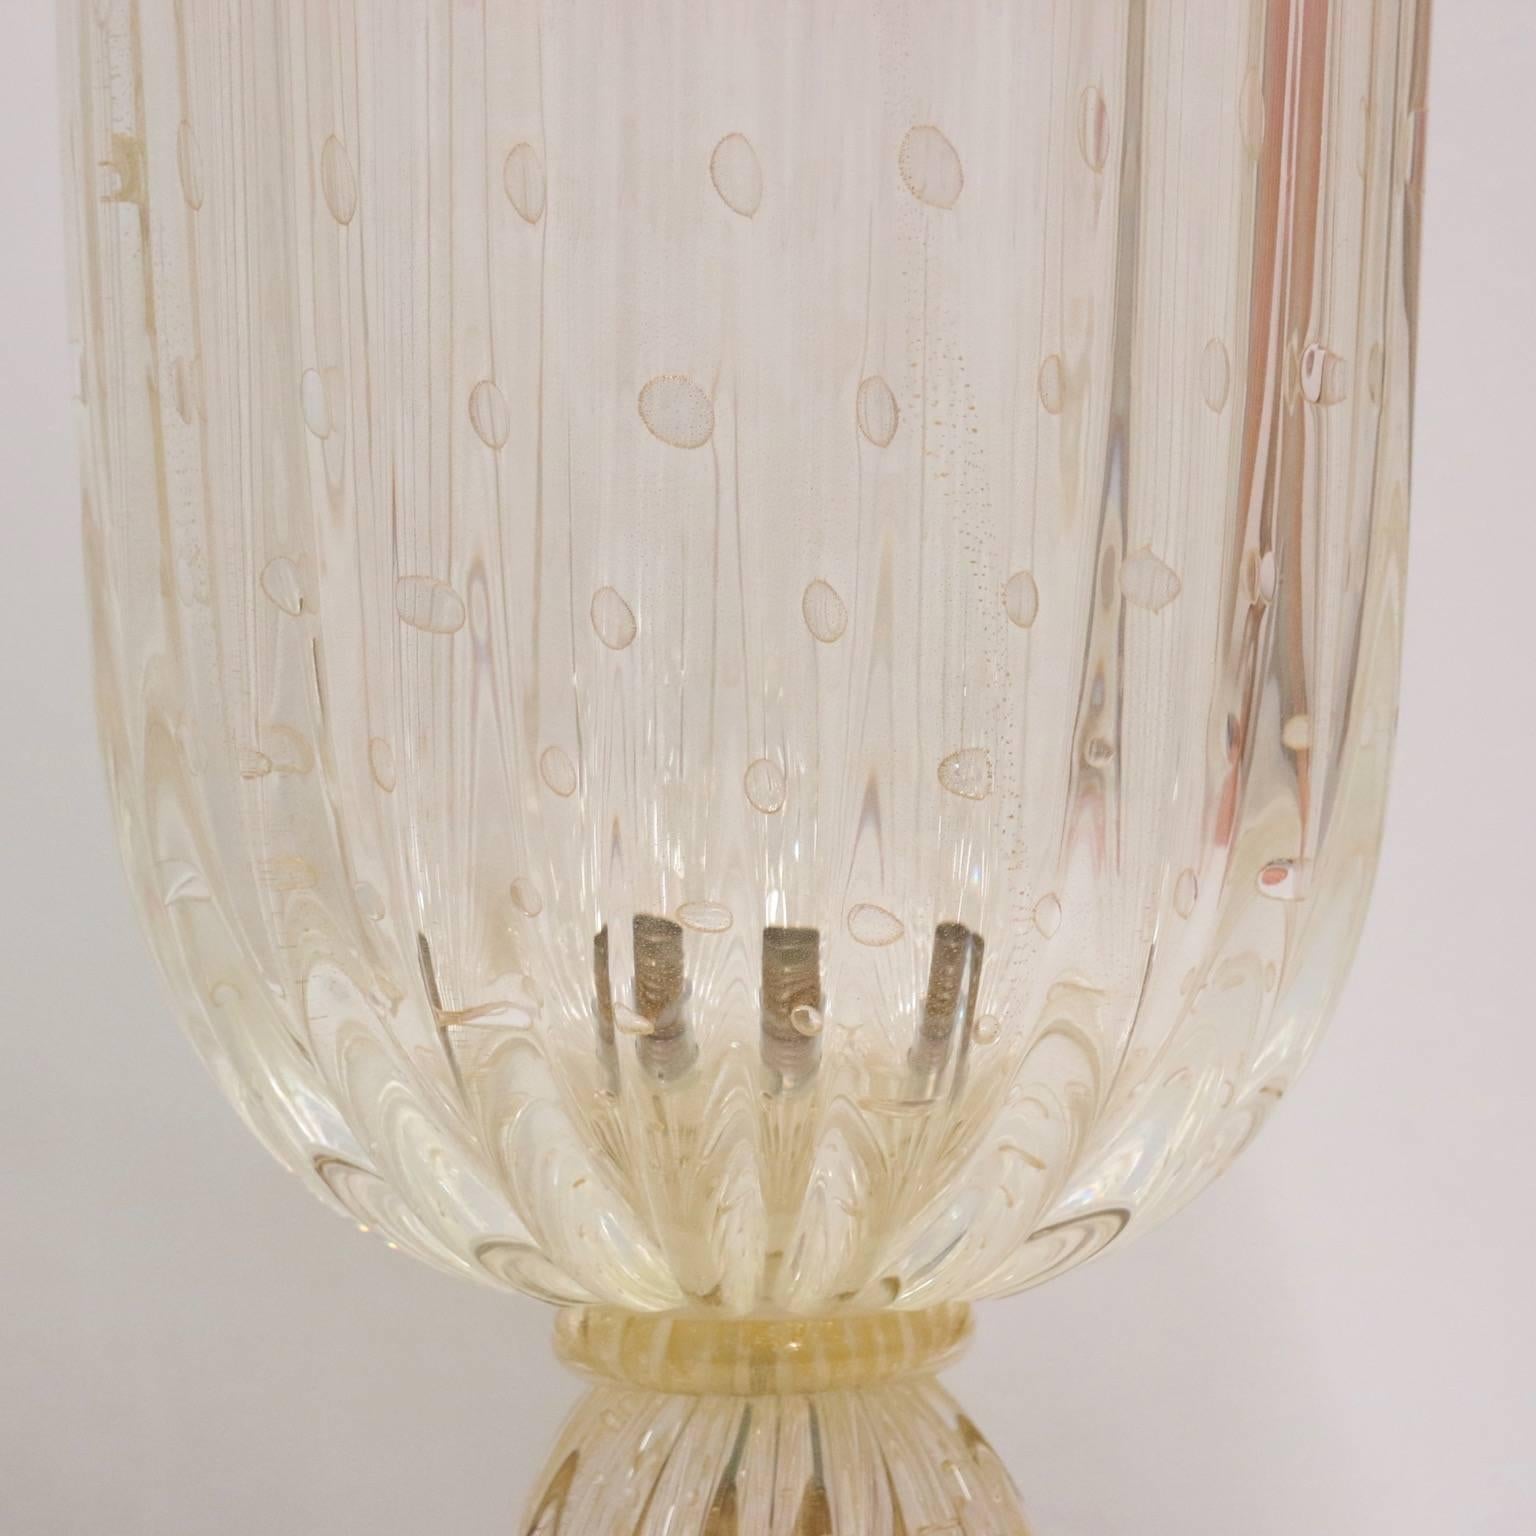 Hollywood Regency Murano glass urn-shaped lamps with controlled bubble technique and infused with gold flakes by Barovier. These lamps are large and very heavy. 

Each has been fully restored with new wiring and takes a standard light bulb. The